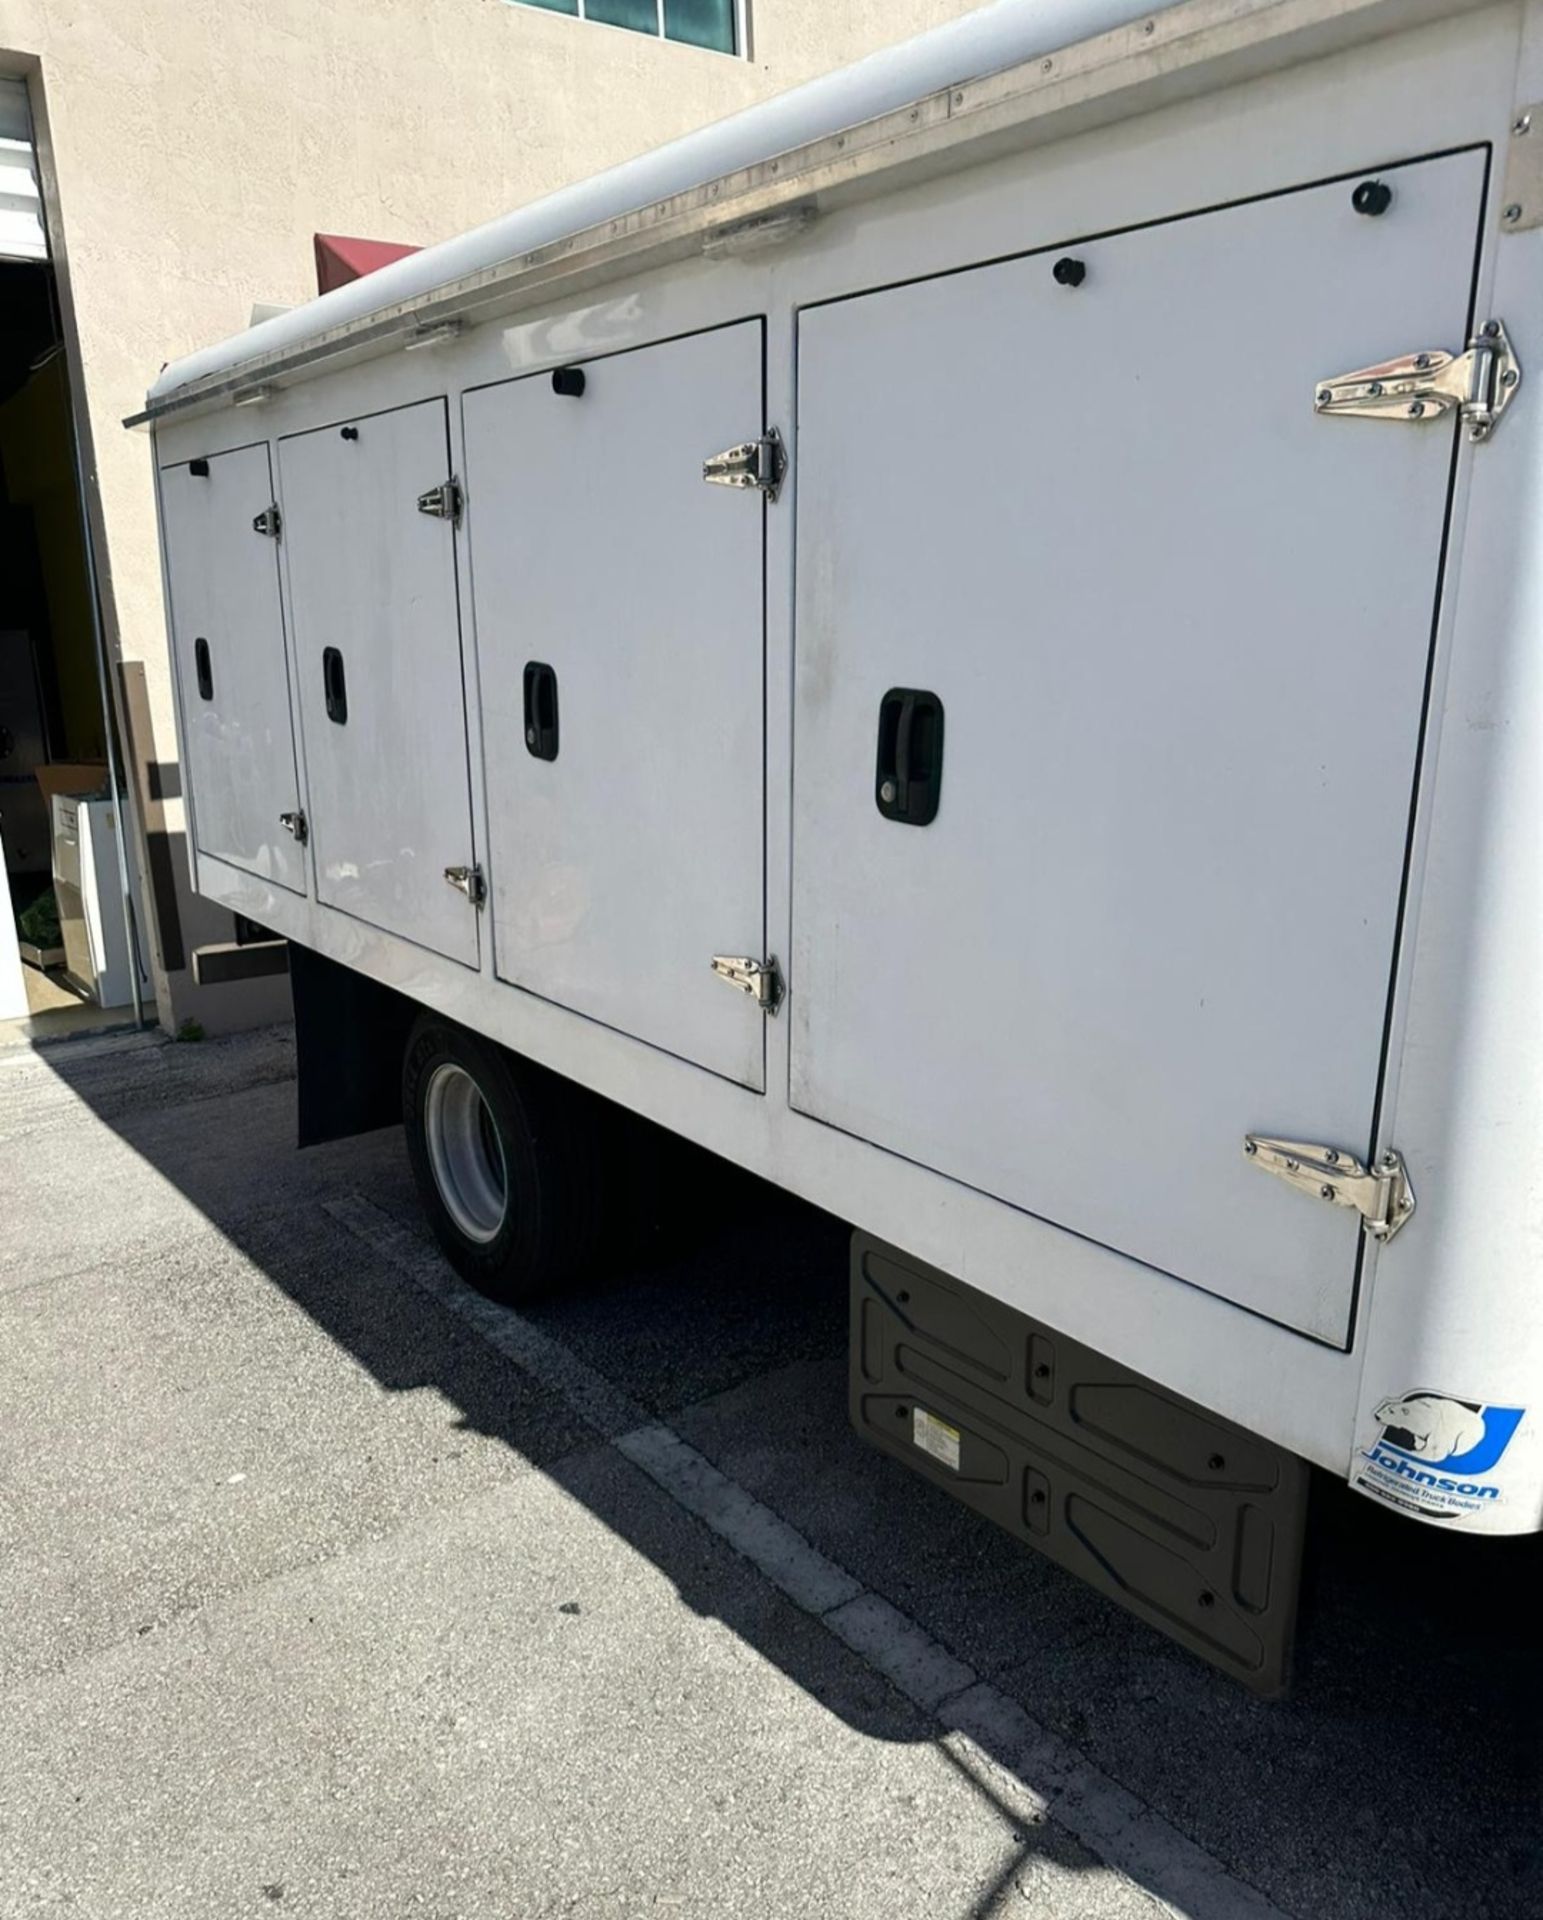 2013 Isuzu NPR Diesel Automatic, Includes: Johnson Refrigeration Body with Cold Plate System - Image 2 of 13